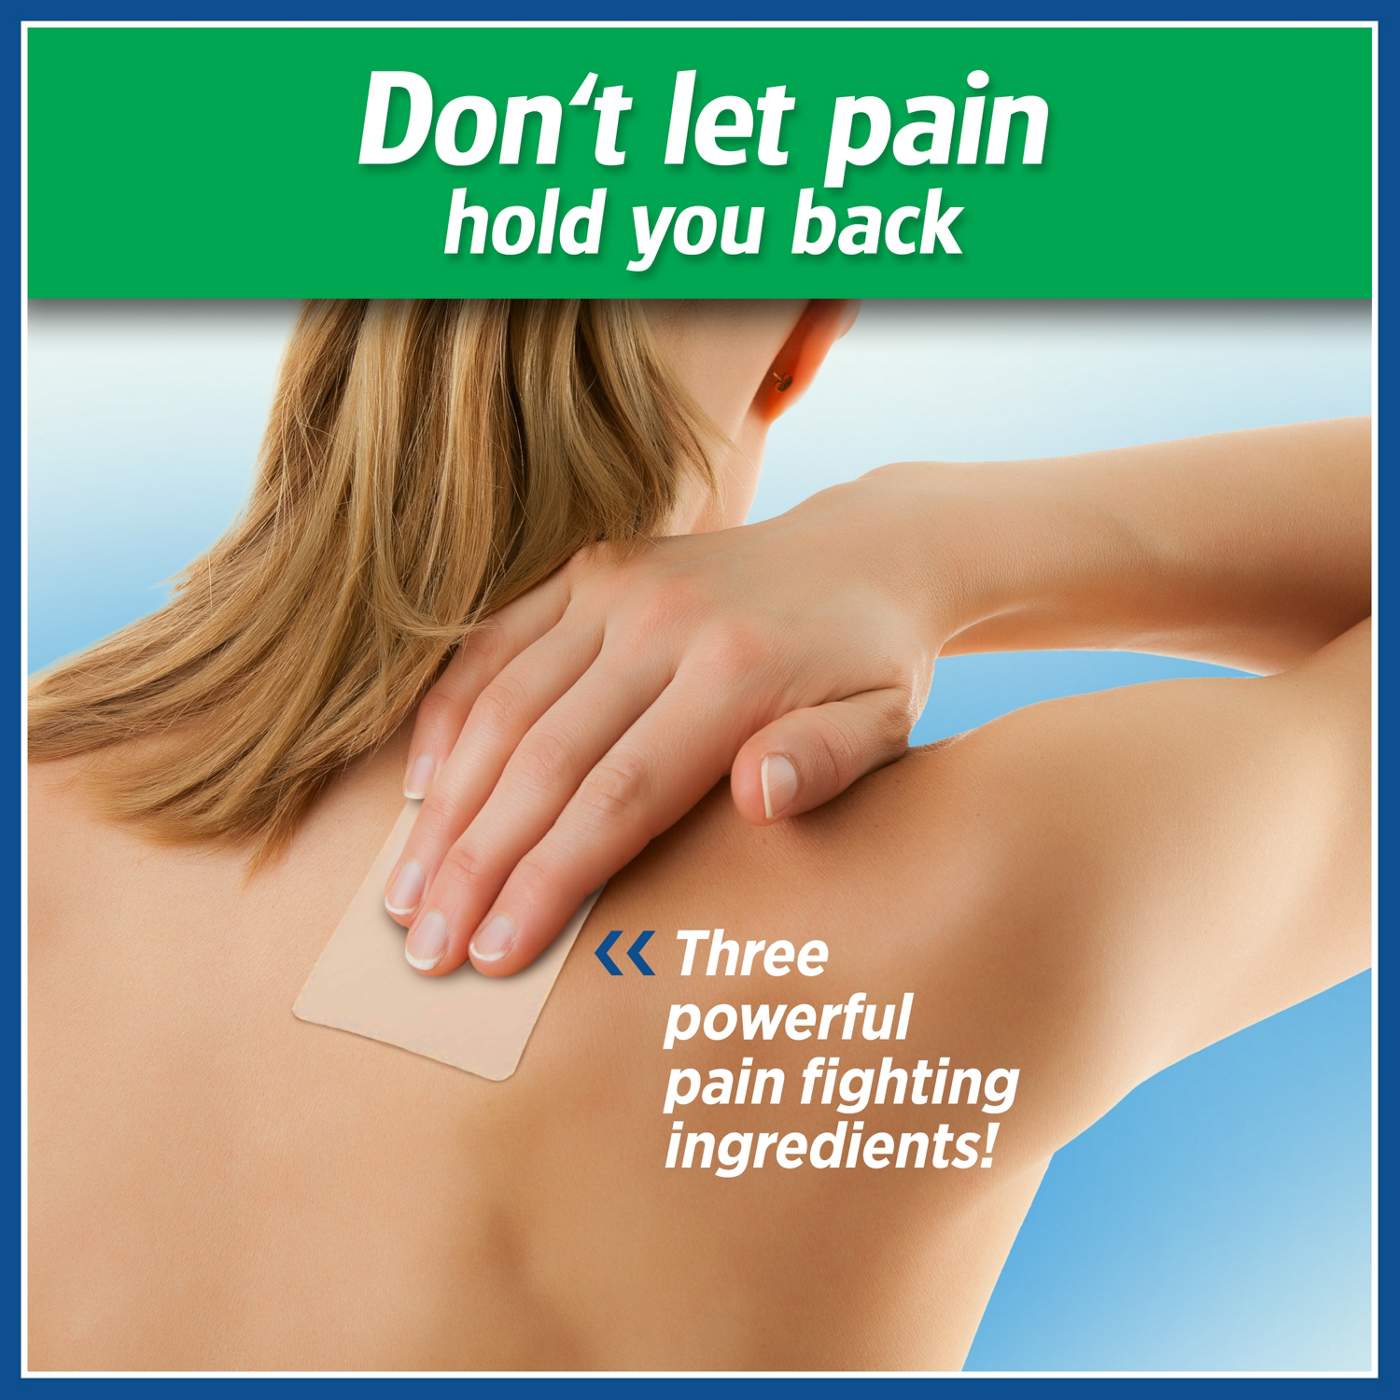 Salonpas Pain Relieving Patch; image 3 of 6